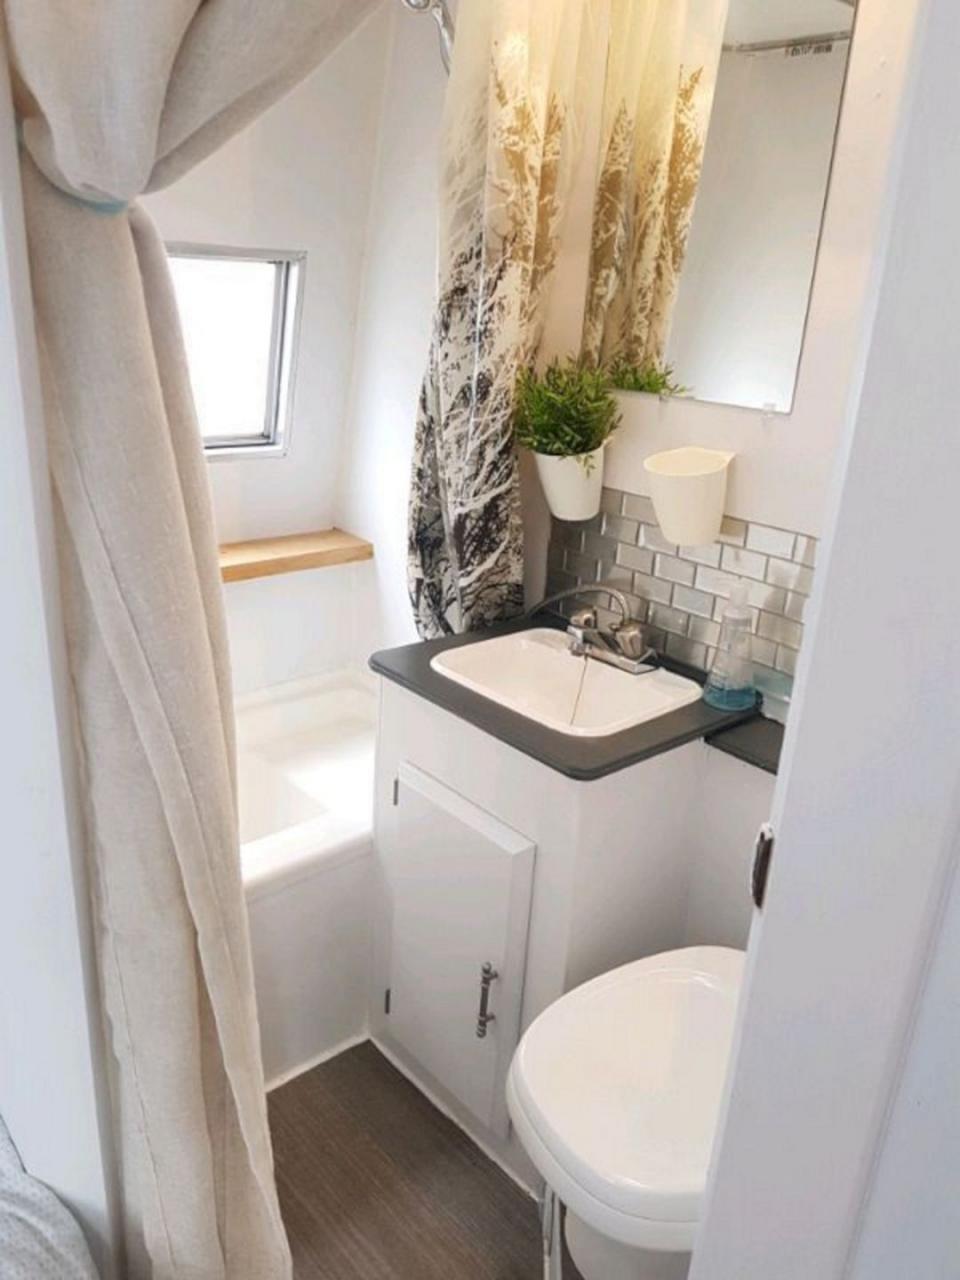 Breathtaking 17 Small RV Bathroom Renovation To Make Your More Cozy For